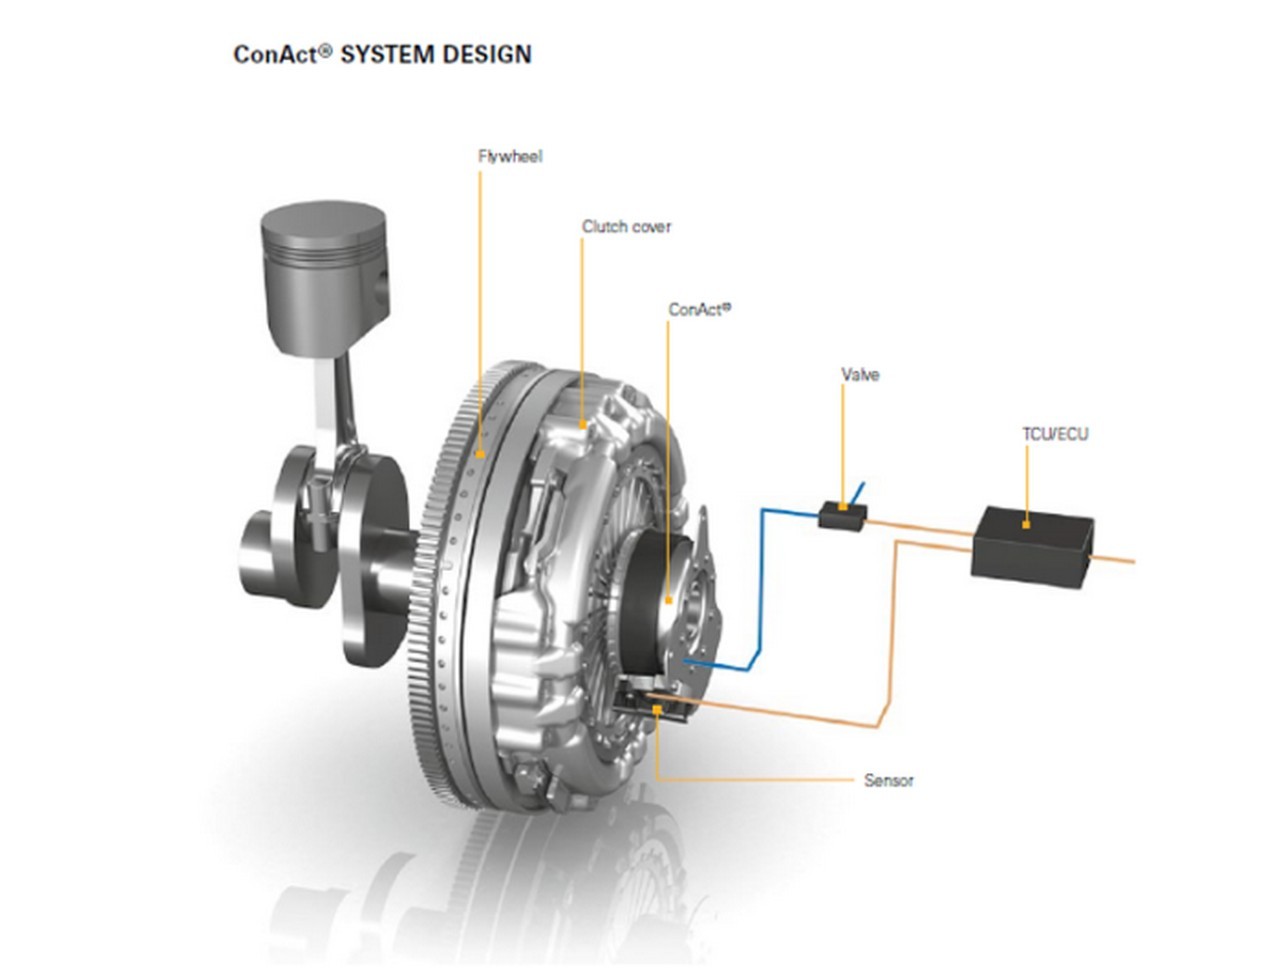 zf-conact-system